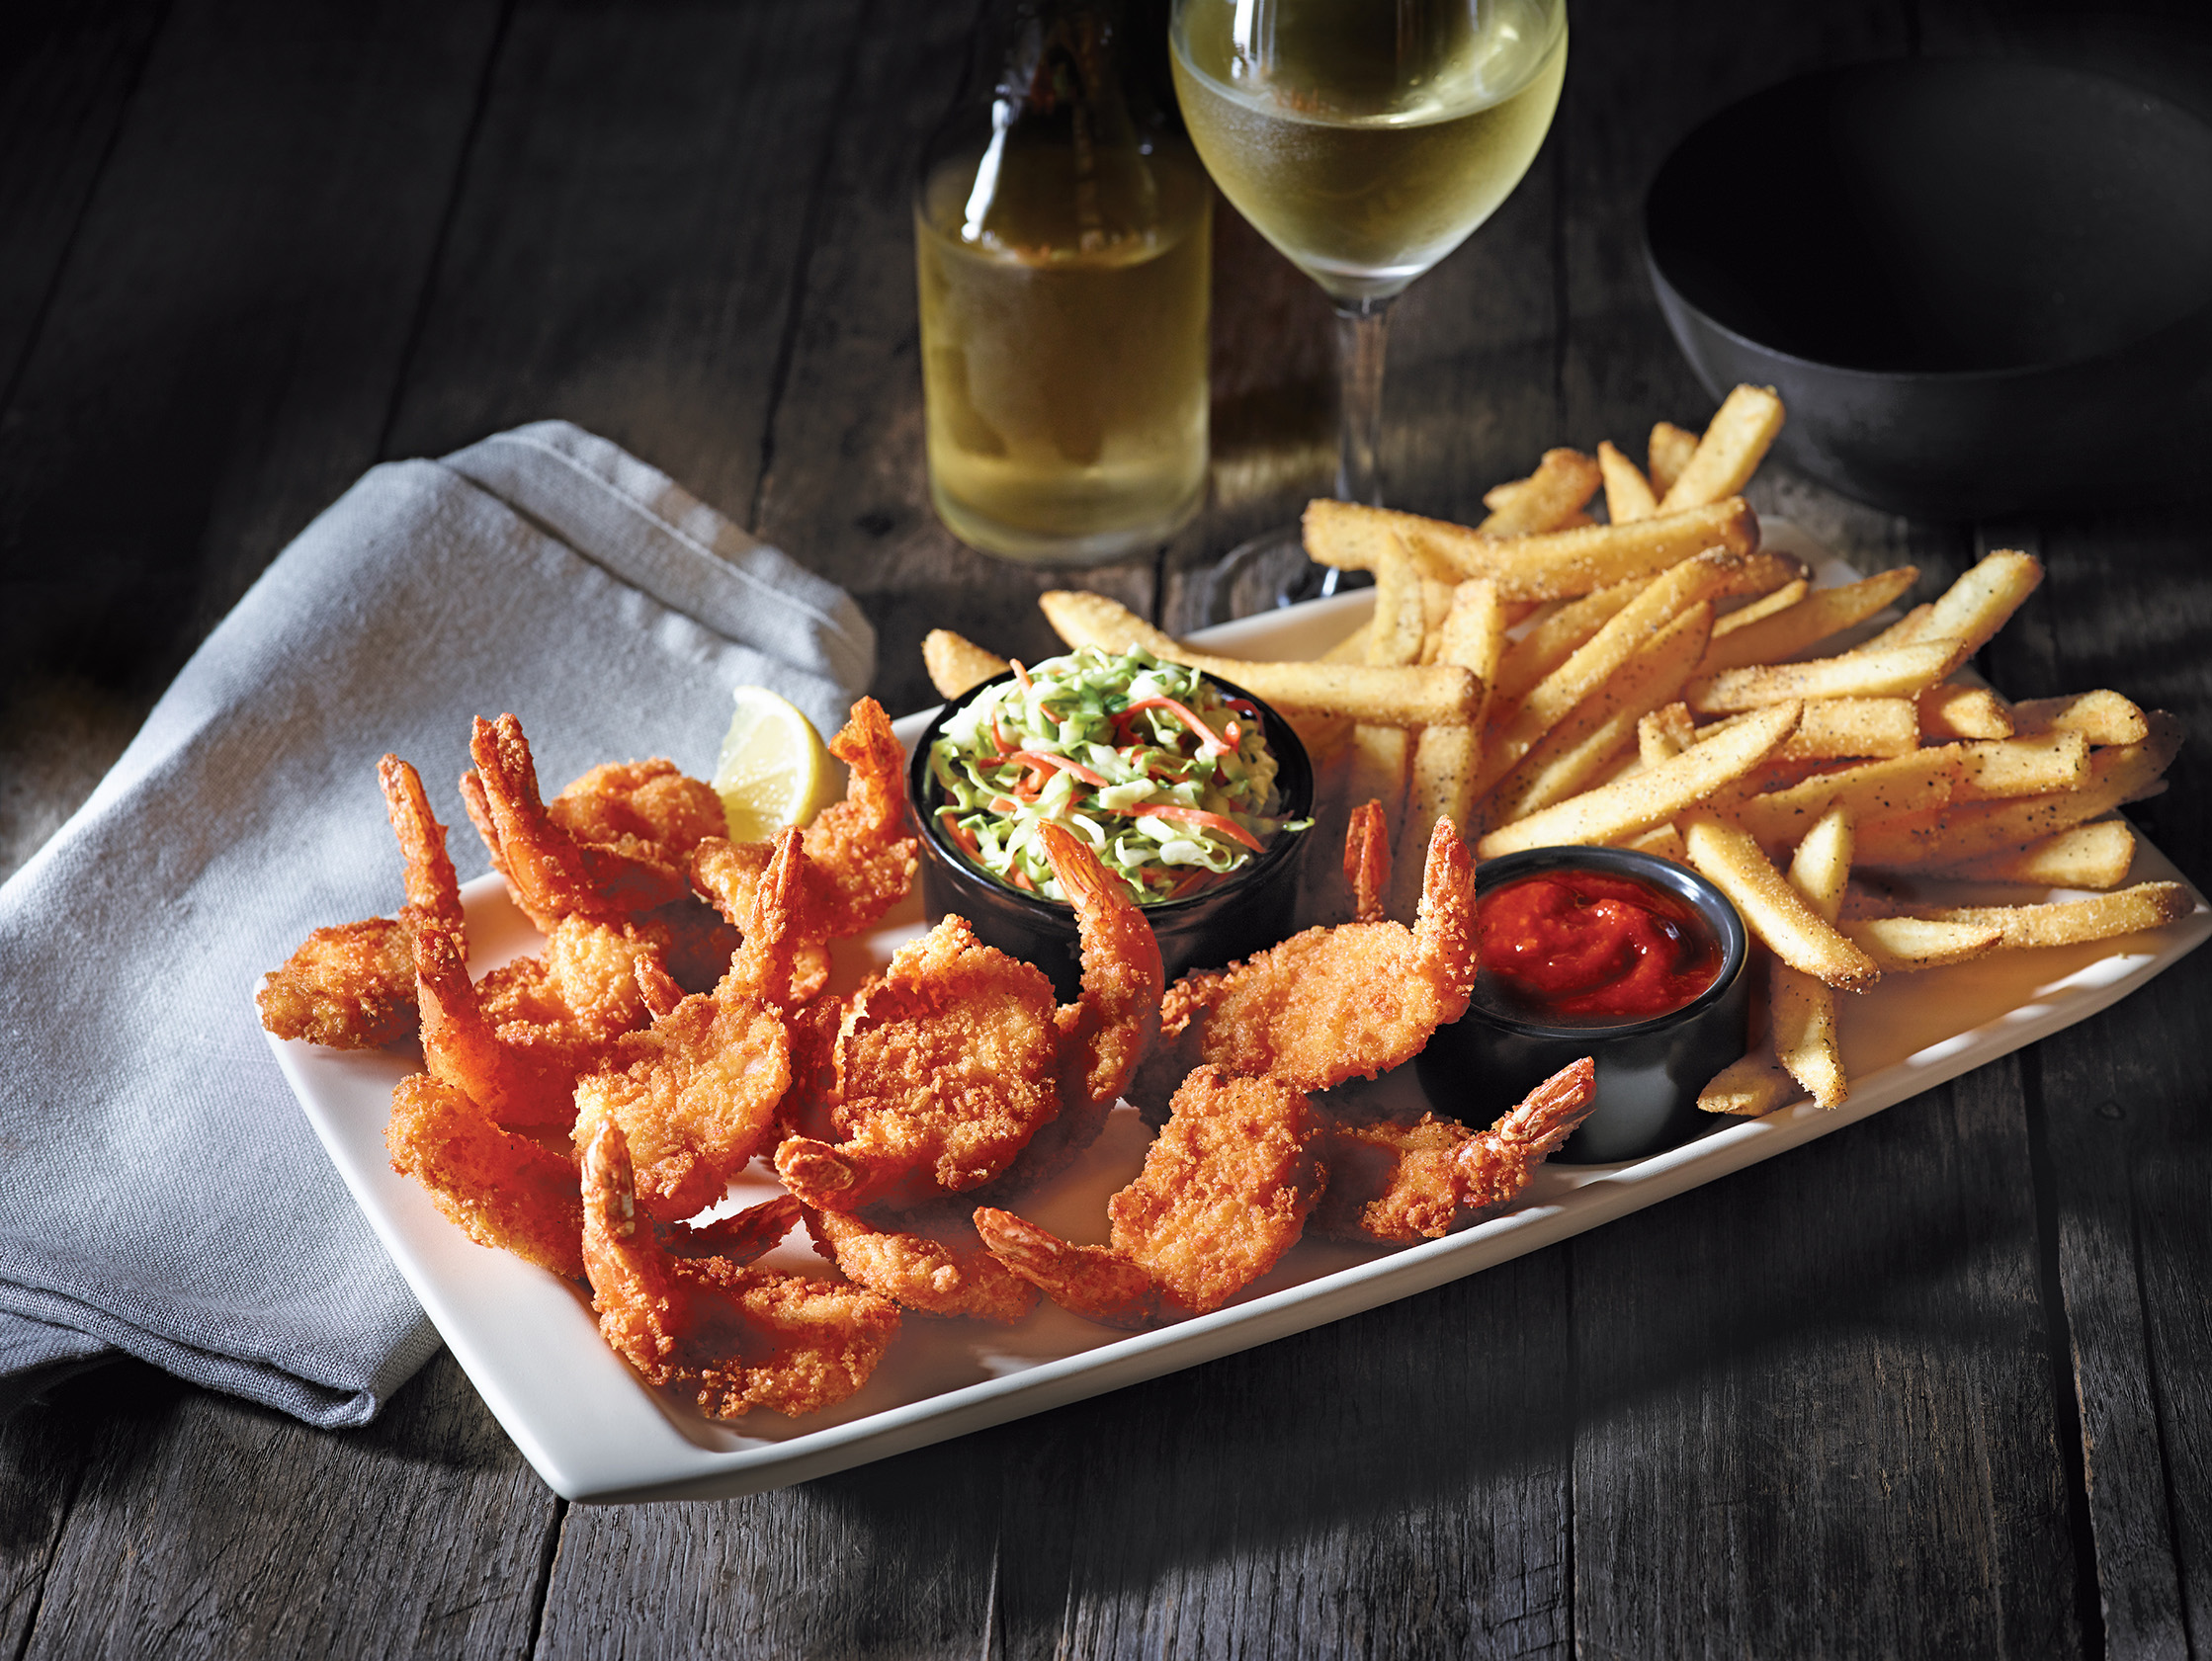 A generous portion of succulent shrimp, golden fried to crunchy perfection and served with fries, cole slaw and cocktail sauce.